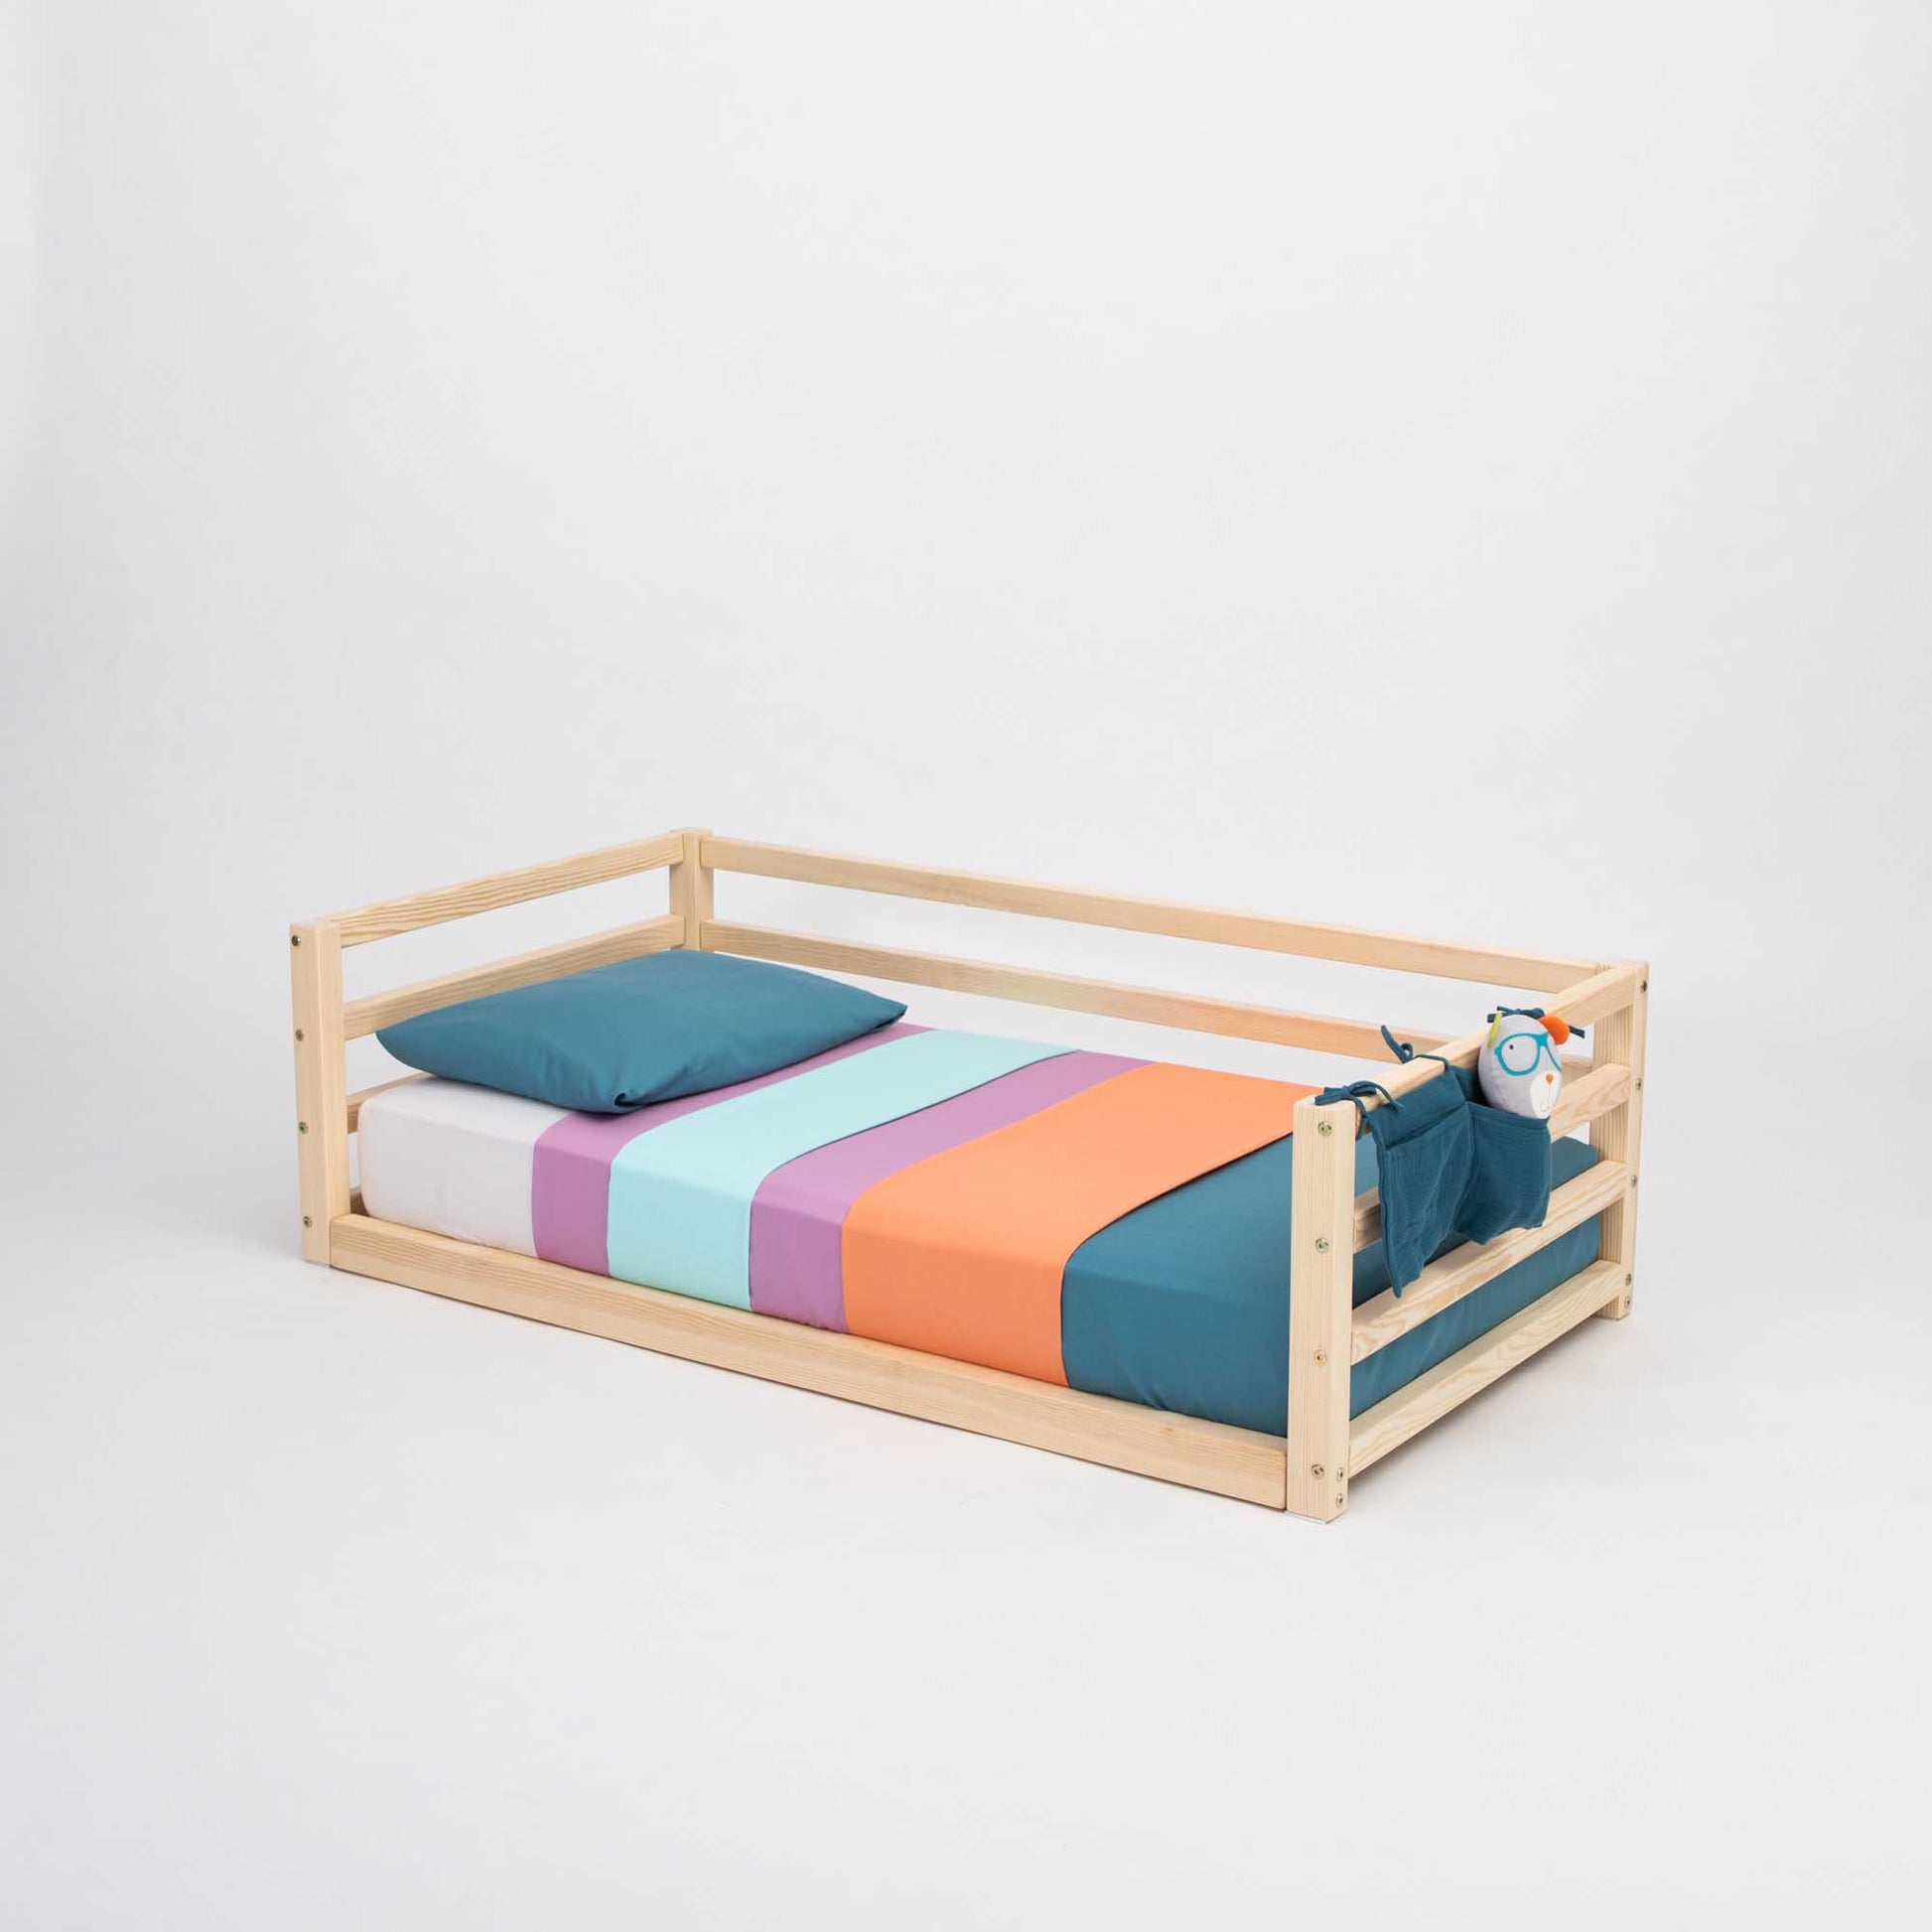 A Sweet Home From Wood transitional children's floor level bed with colorful sheets and a wooden frame.